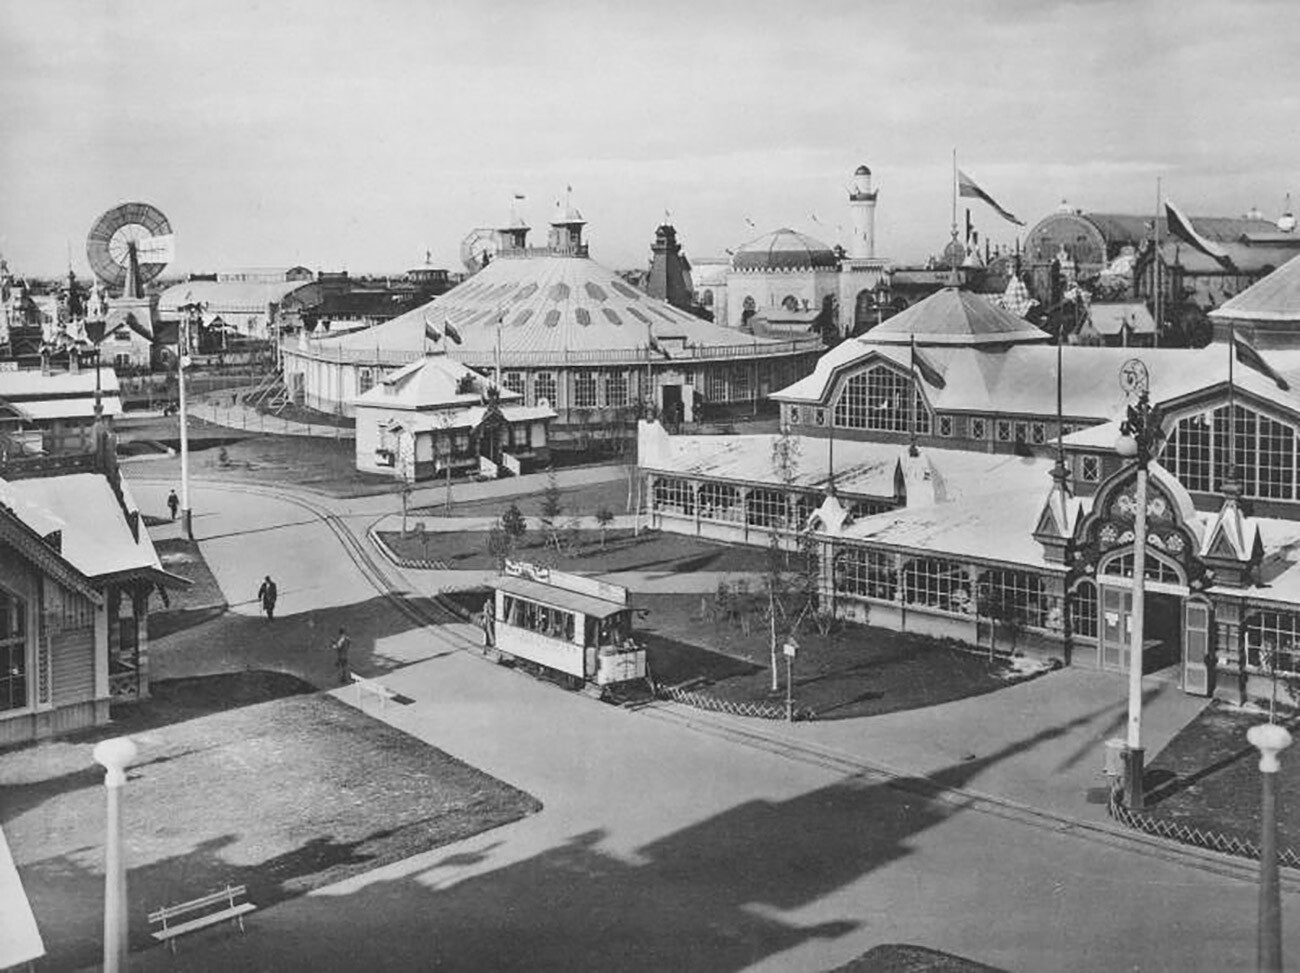 Exhibition pavilions and tram